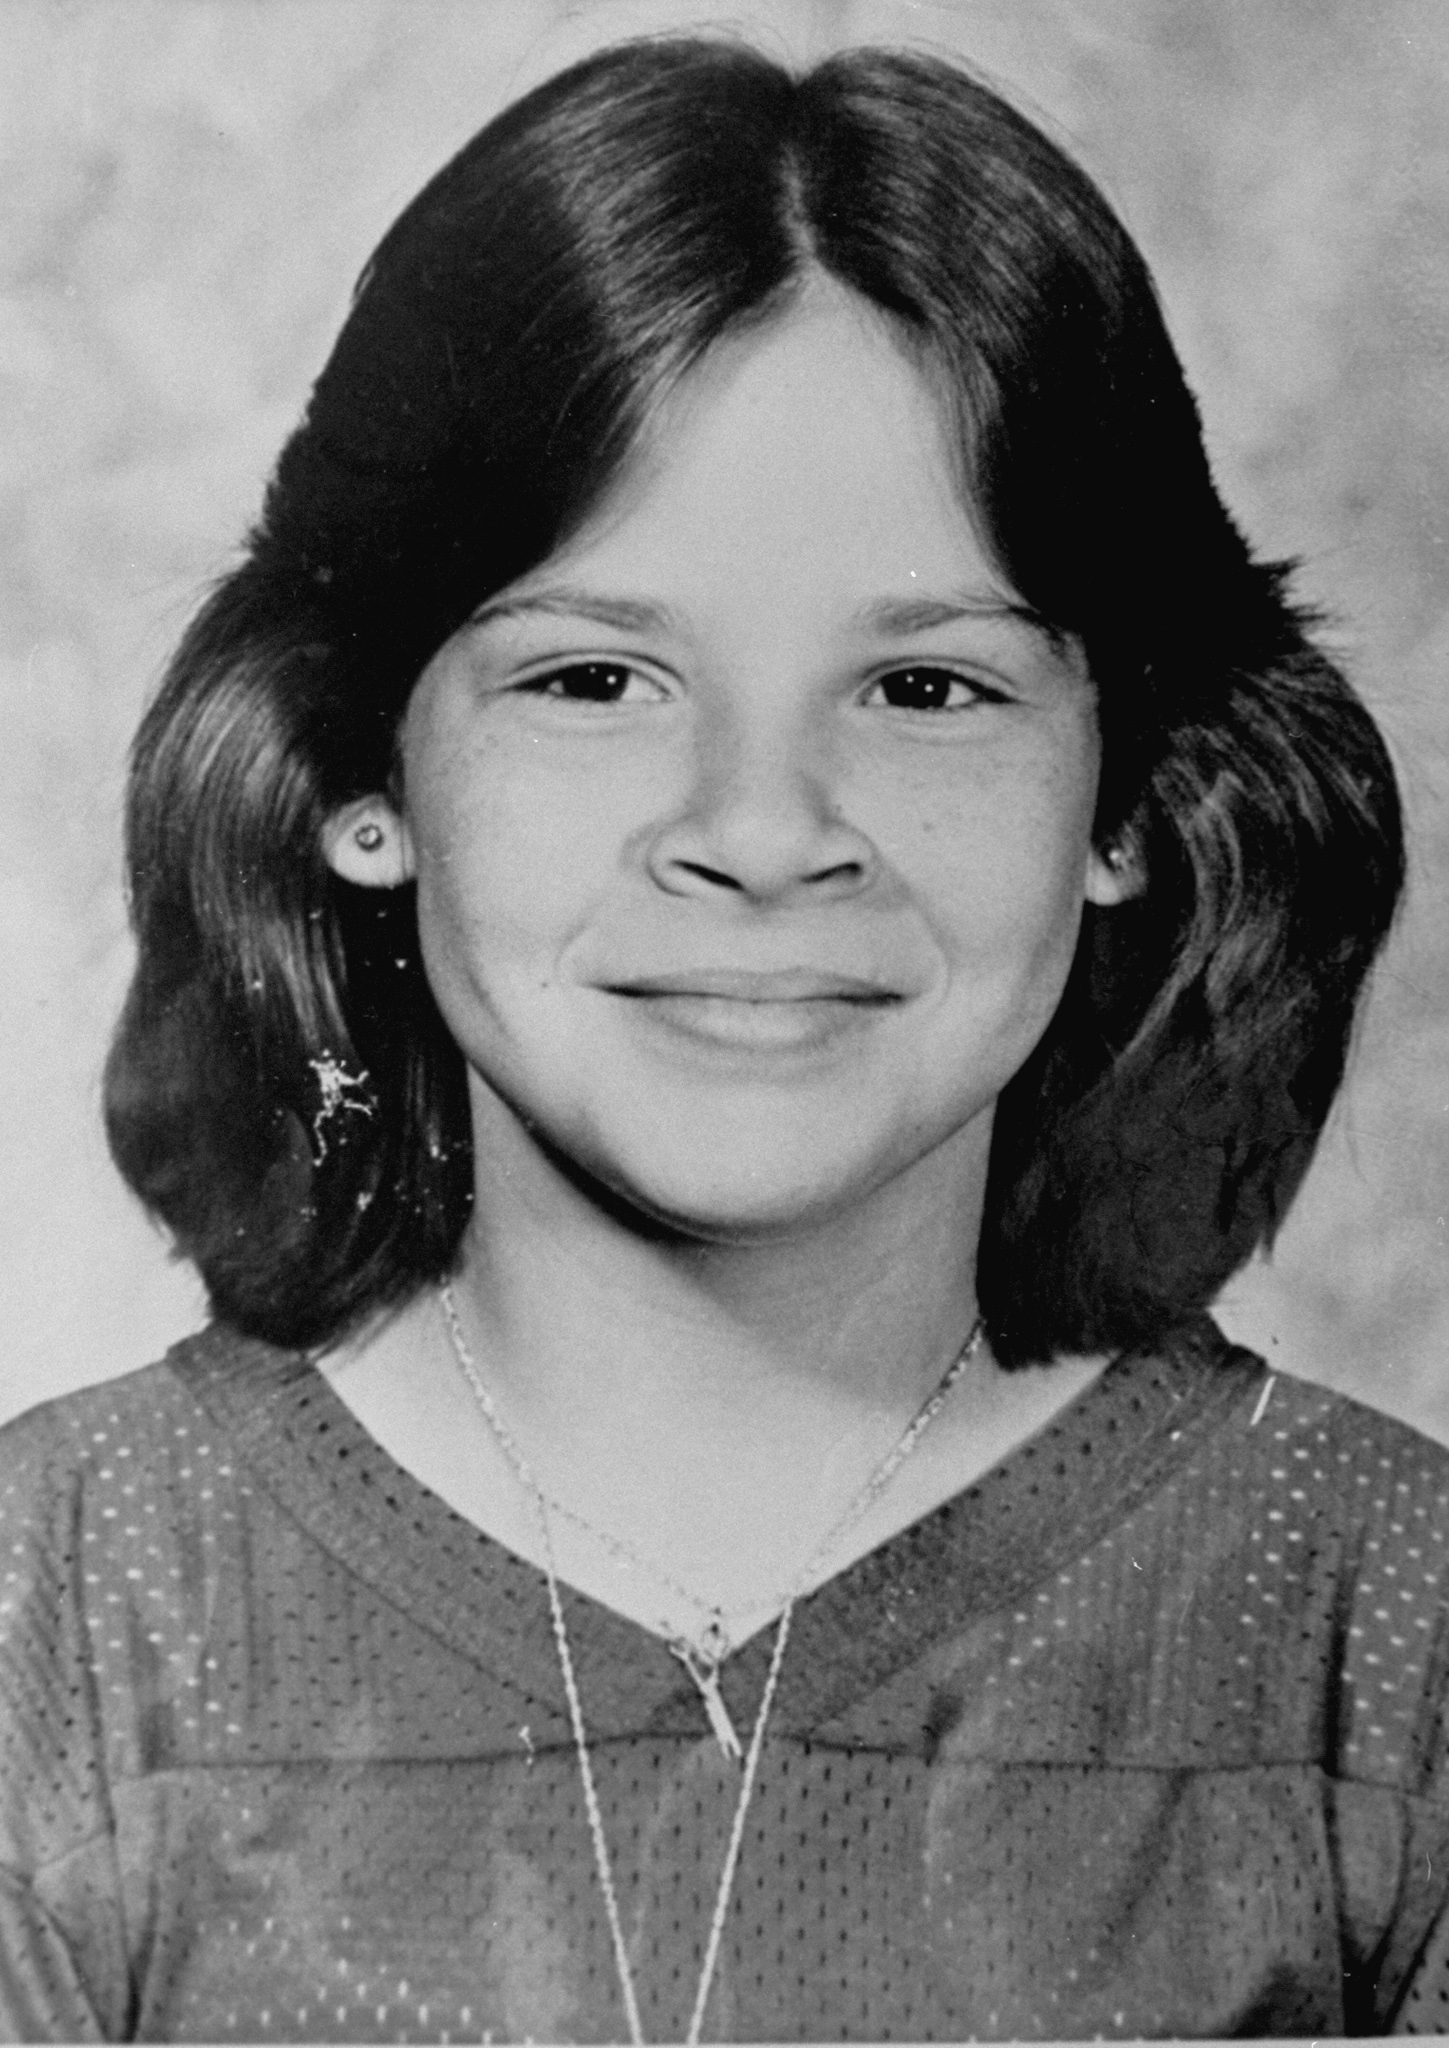 PHOTO: Kimberly Leach, 12, was a victim of serial killer Ted Bundy.